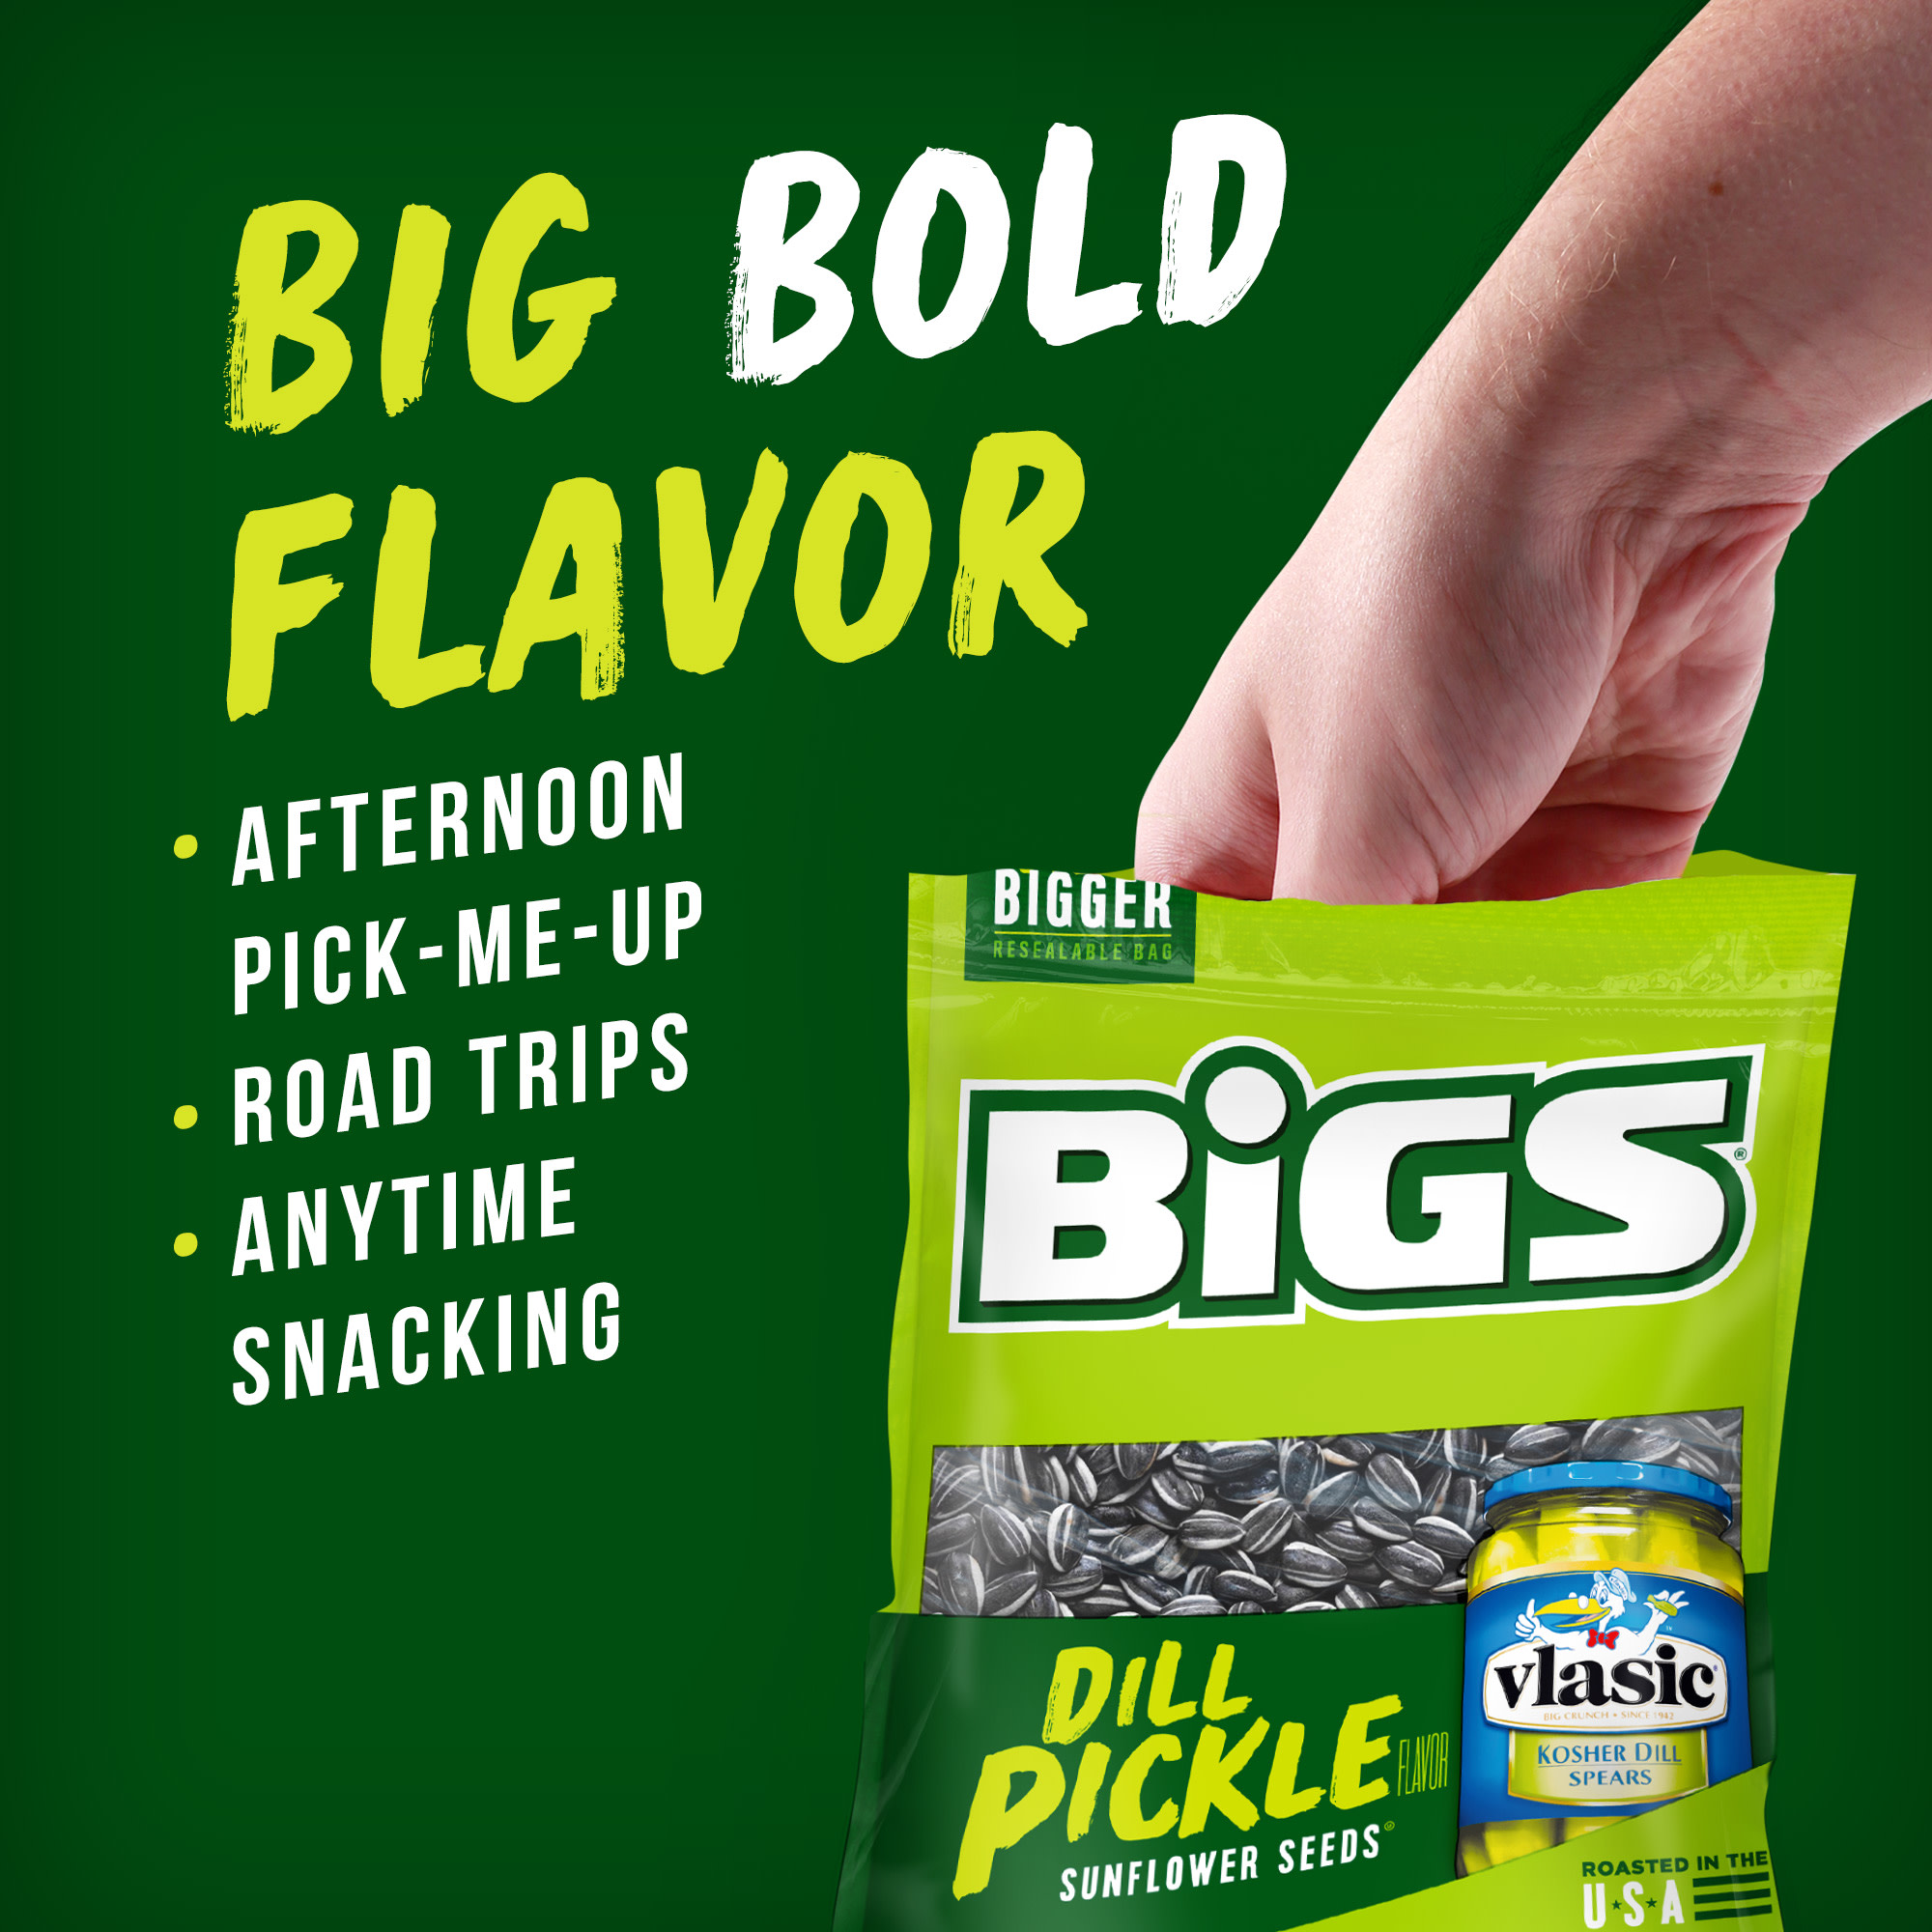 Bigs Vlasic Dill Pickle Sunflower Seeds, 5.35 oz. Bag - image 4 of 8